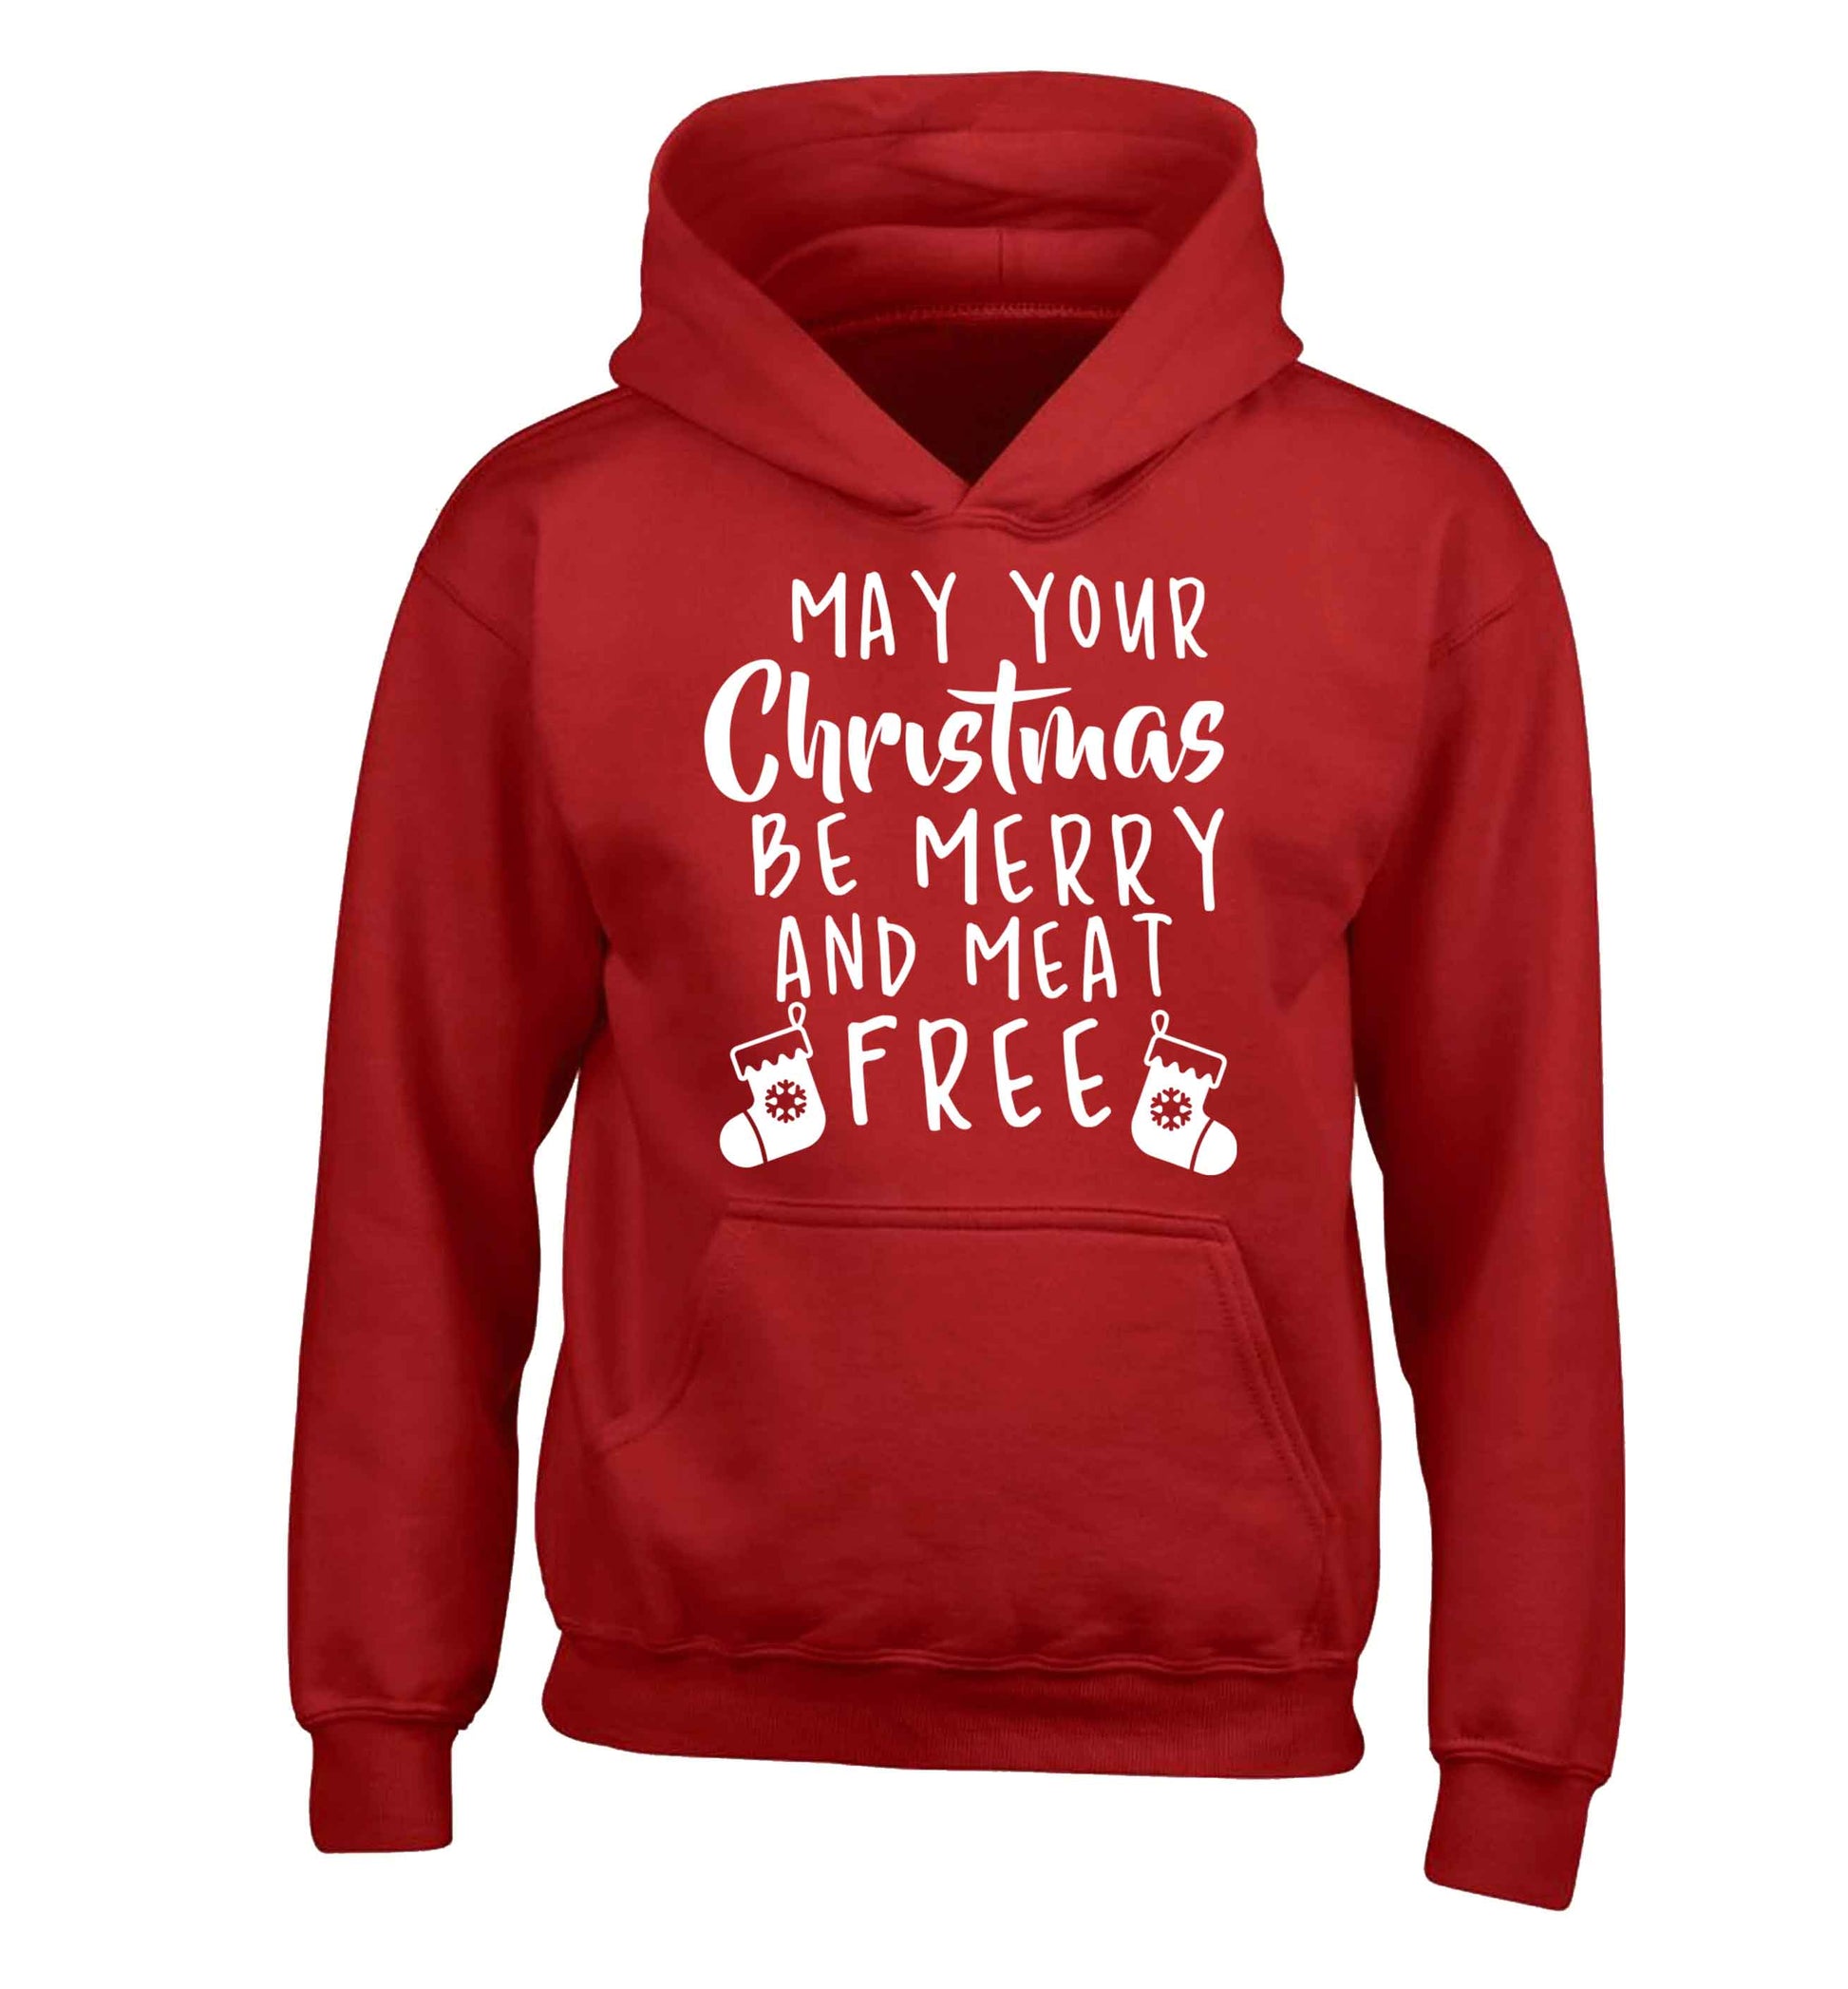 May your Christmas be merry and meat free children's red hoodie 12-13 Years